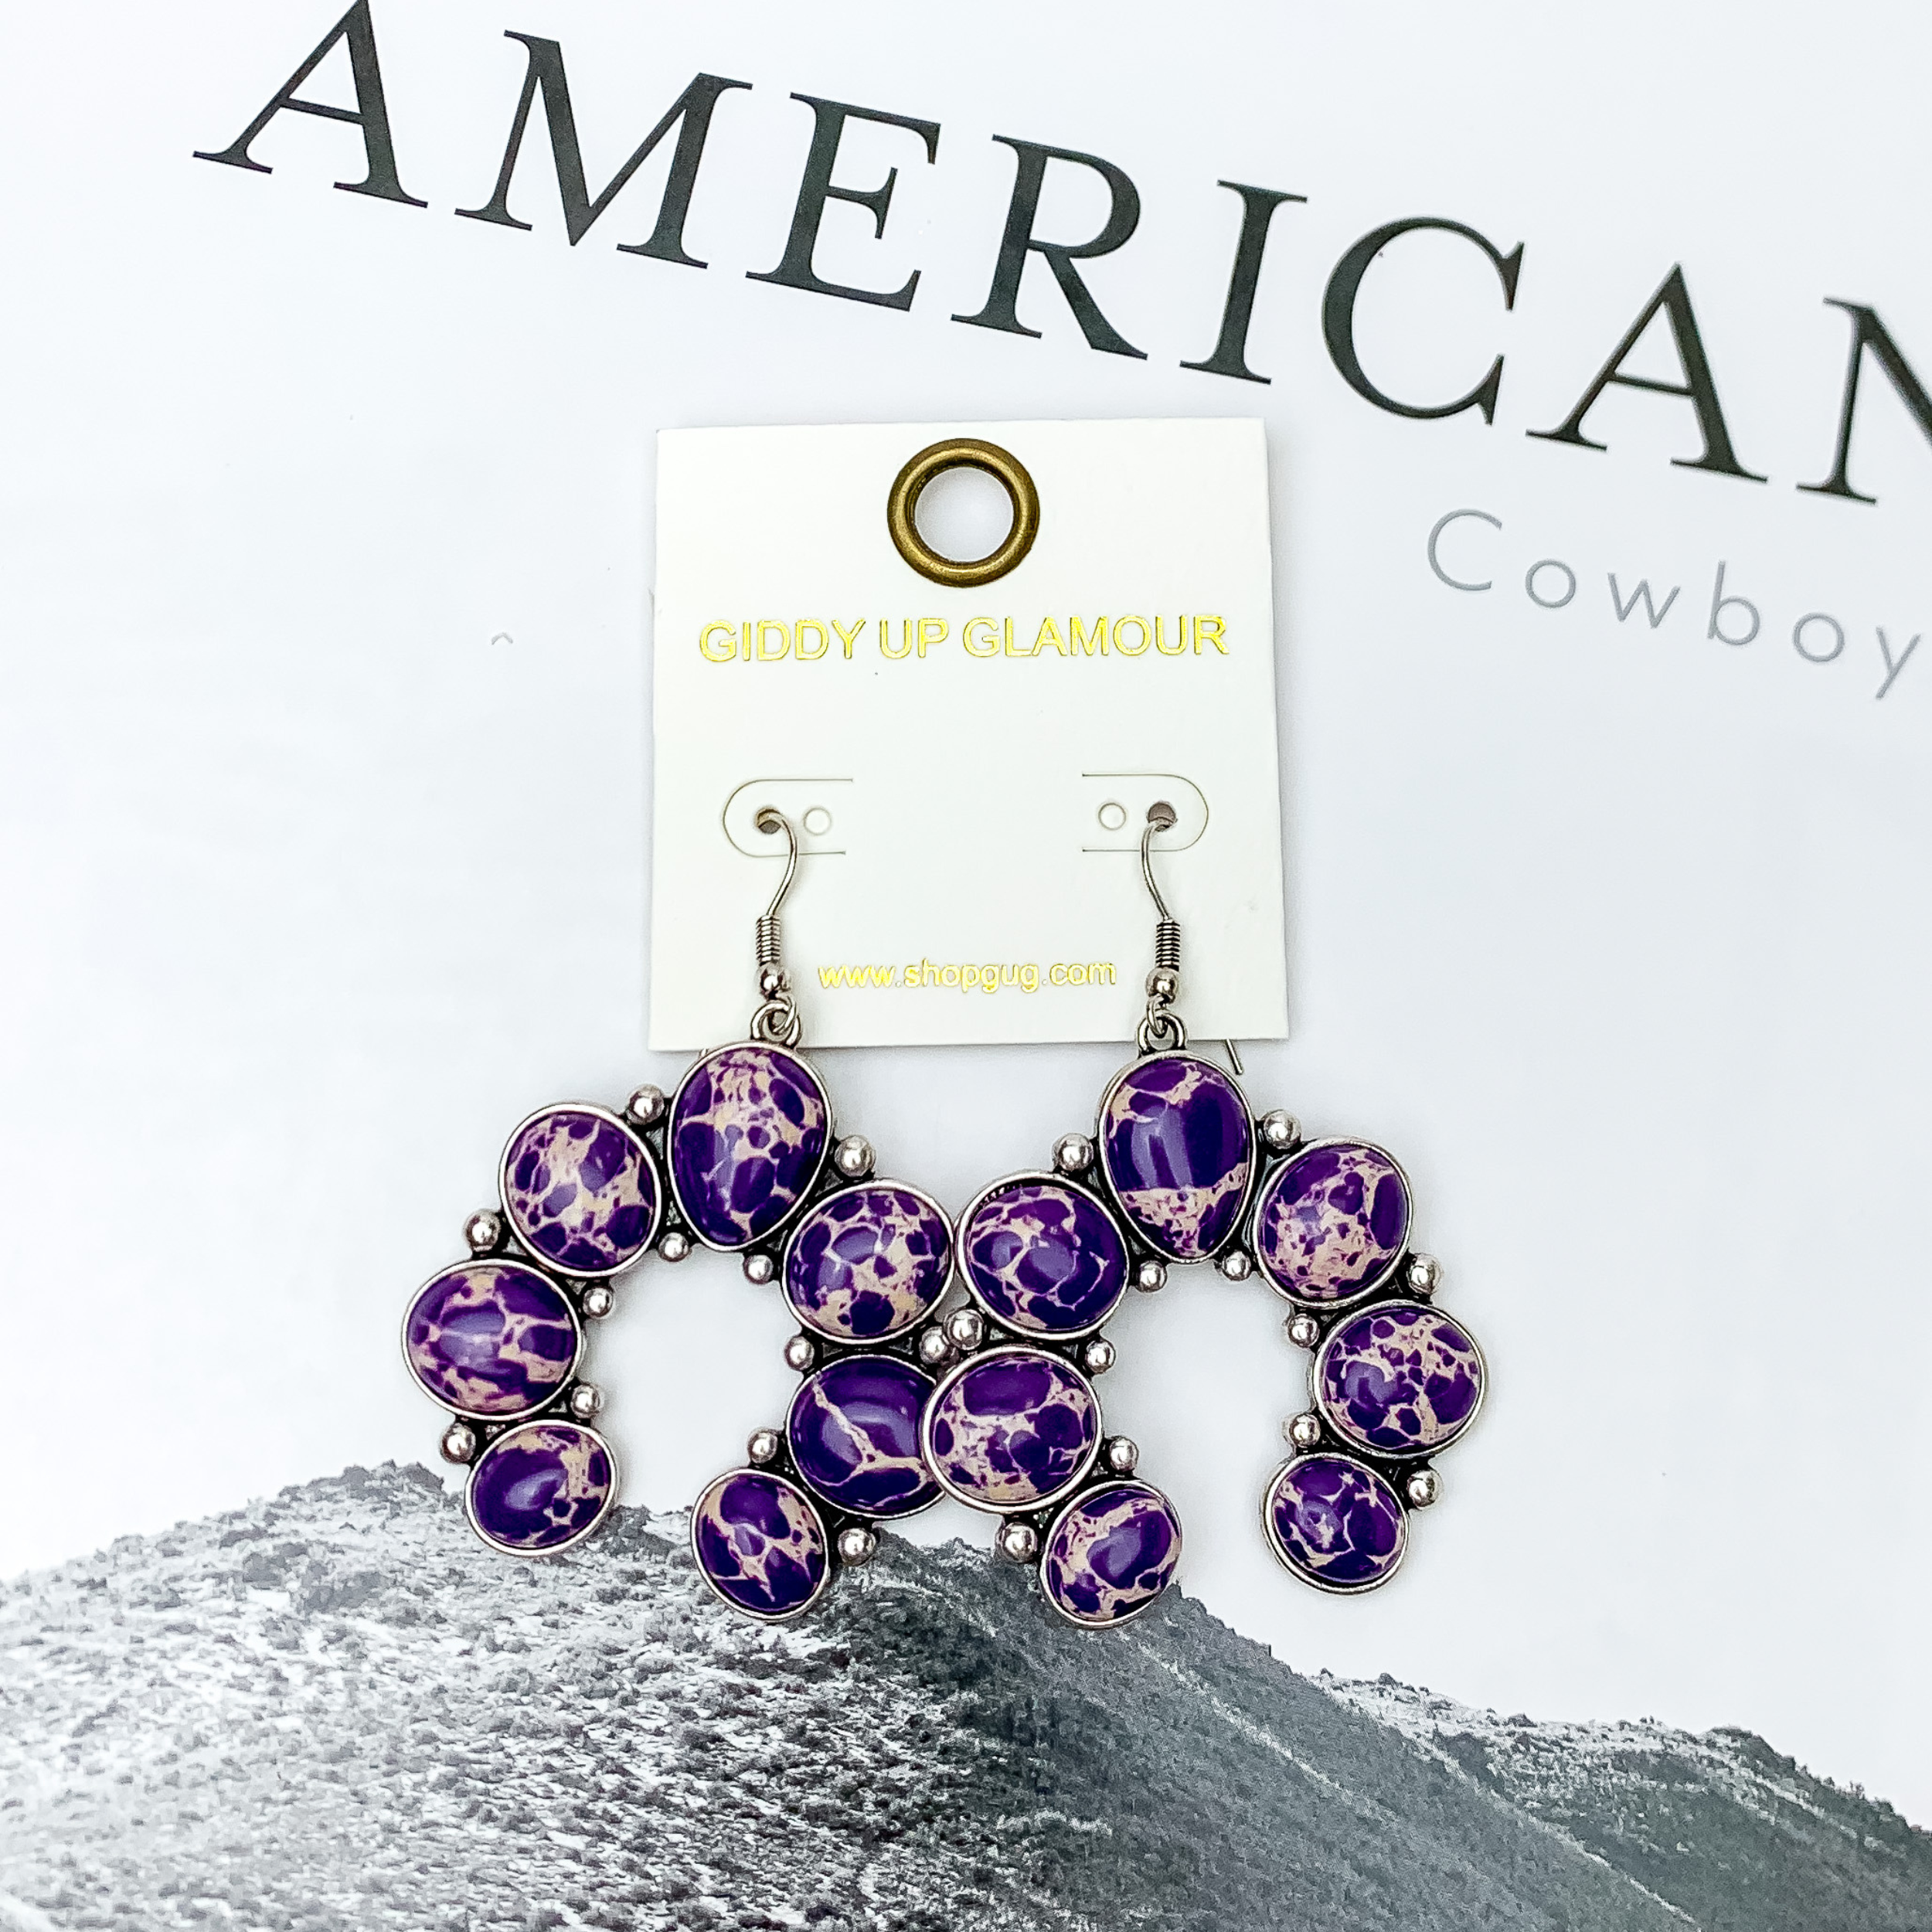 Squash Blossom Stone Earrings In Purple. Pictured on a white background with a western scene in the back.